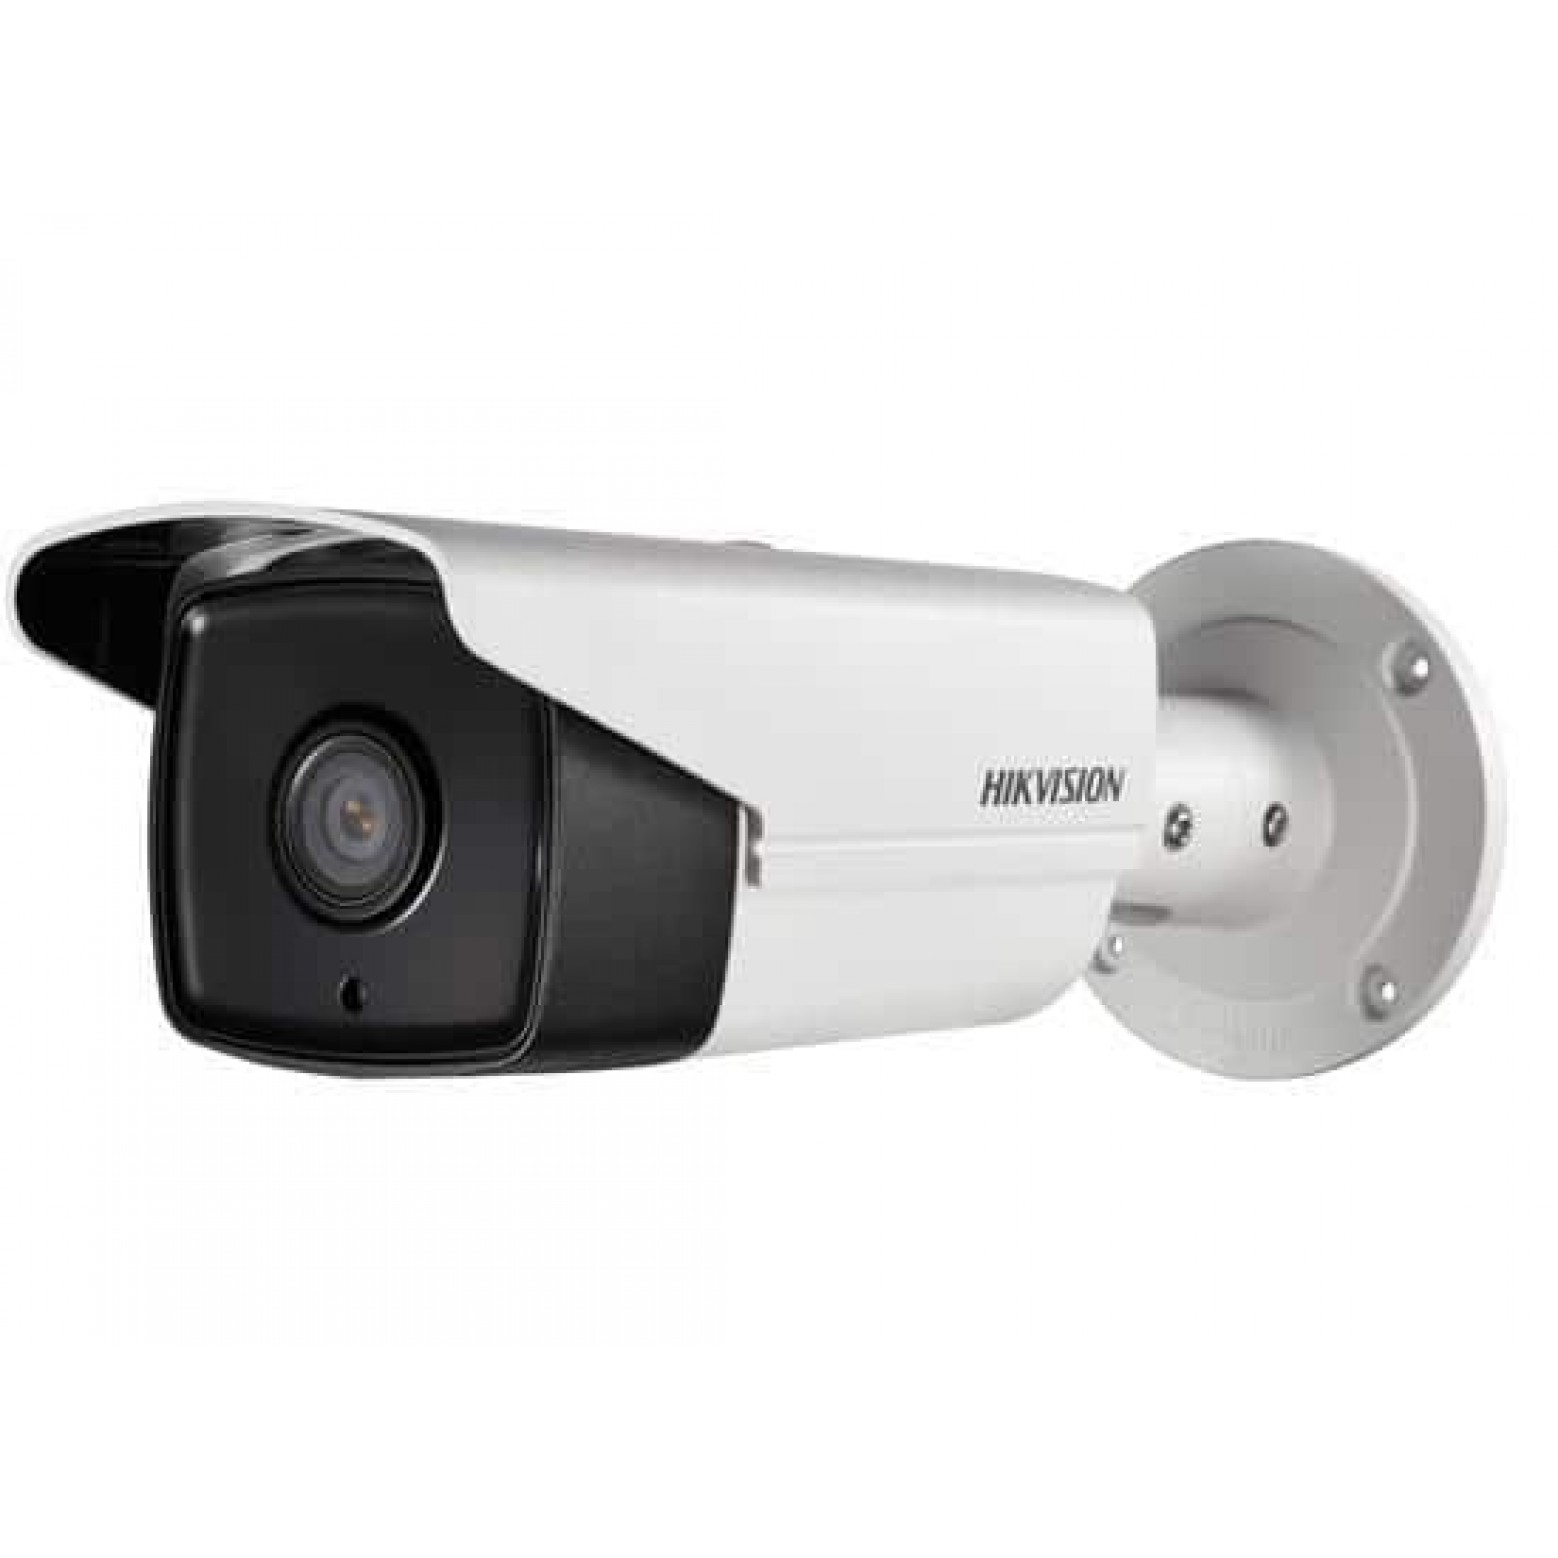 Hikvision DS-2CD4A26FWD-IZHS 8-32mm Darkfighter-luoti